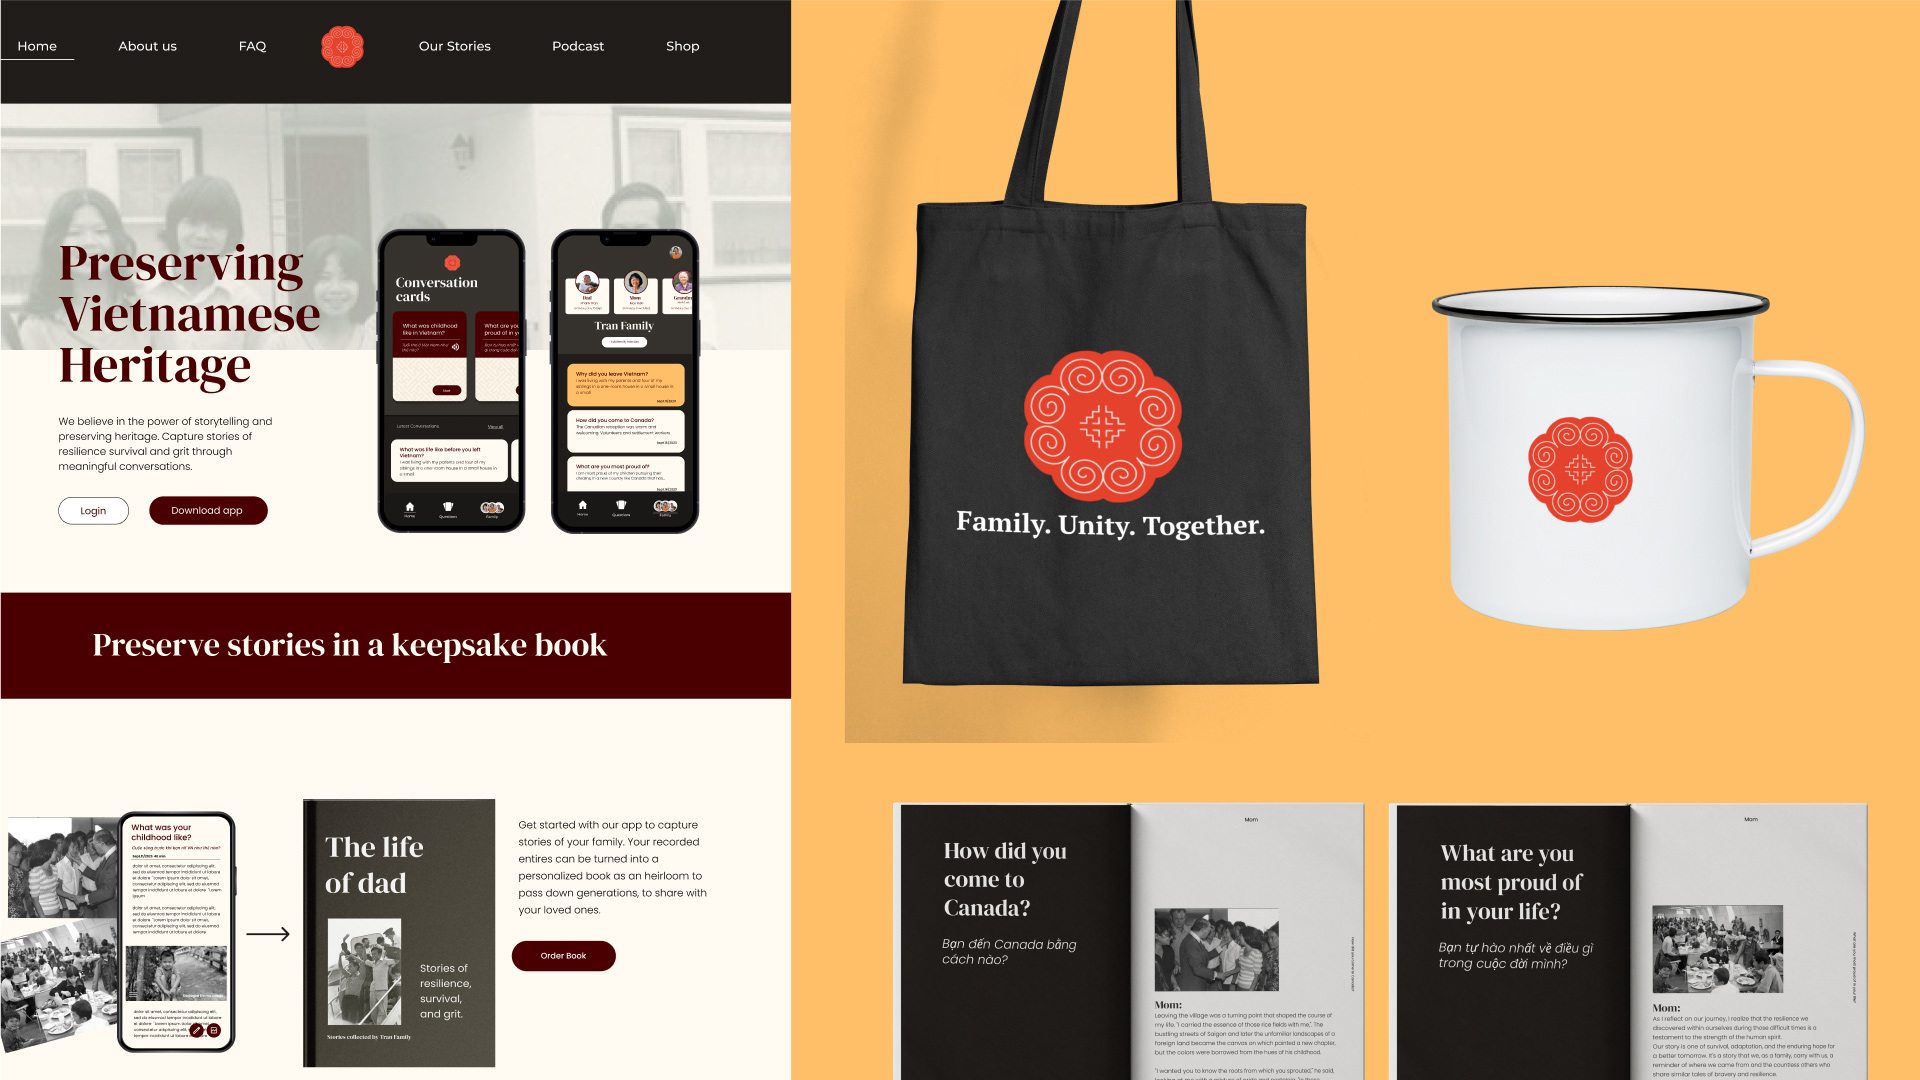 Website page for Vietnamese Storylines, along with some book spreads, a black tote bag, and an enamel mug printed with the Hmong elephant foot symbol.